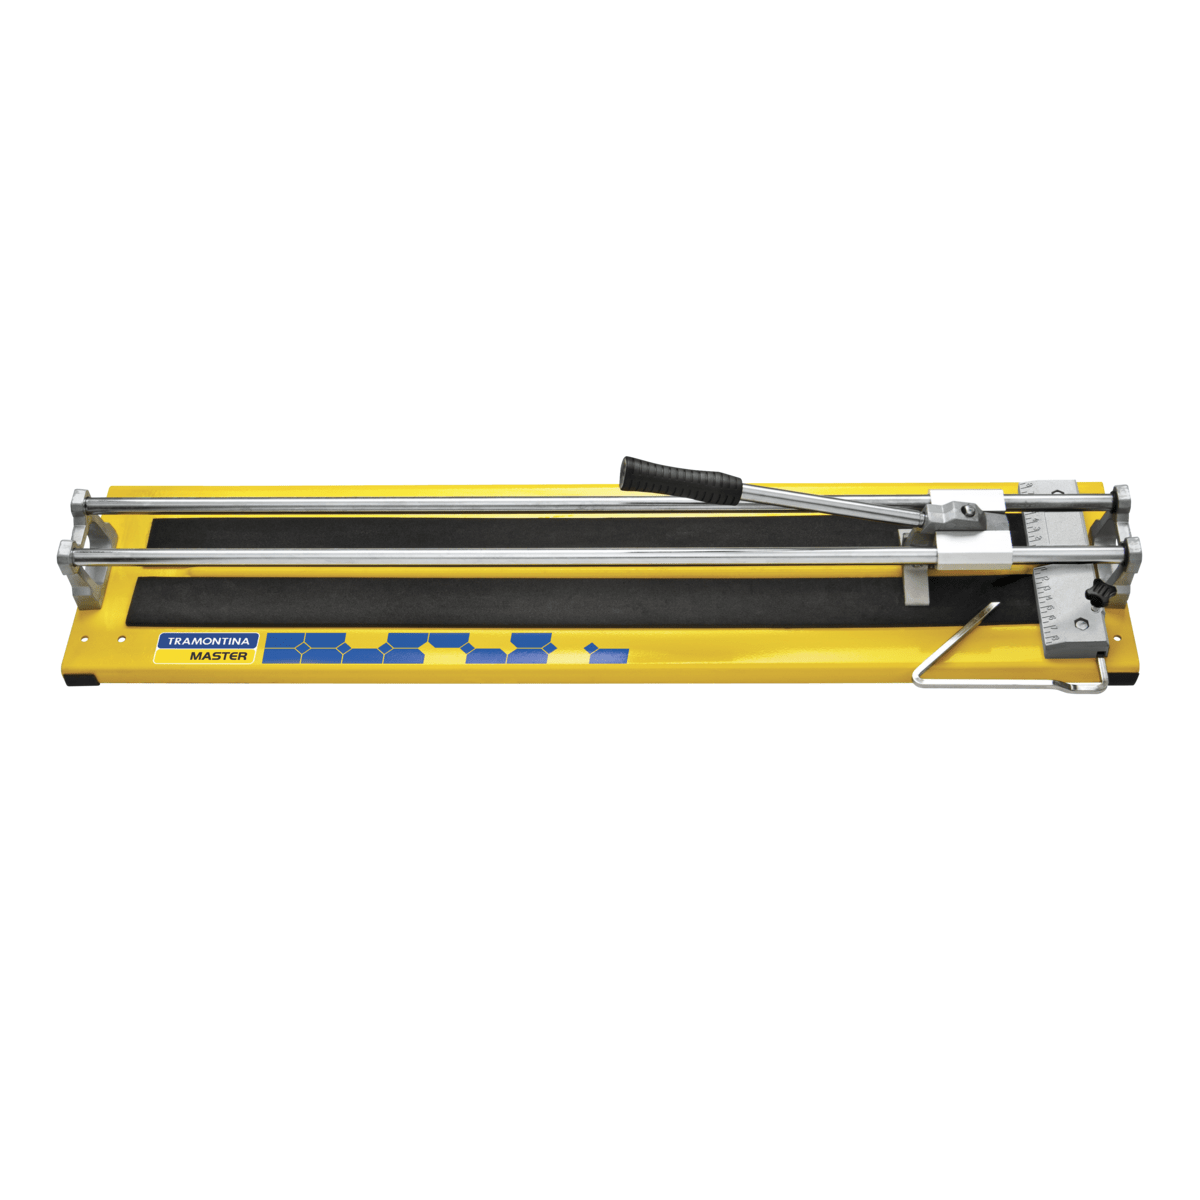 Tramontina 900mm Floor and Tile Cutter | Supply Master | Accra, Ghana Tools Building Steel Engineering Hardware tool